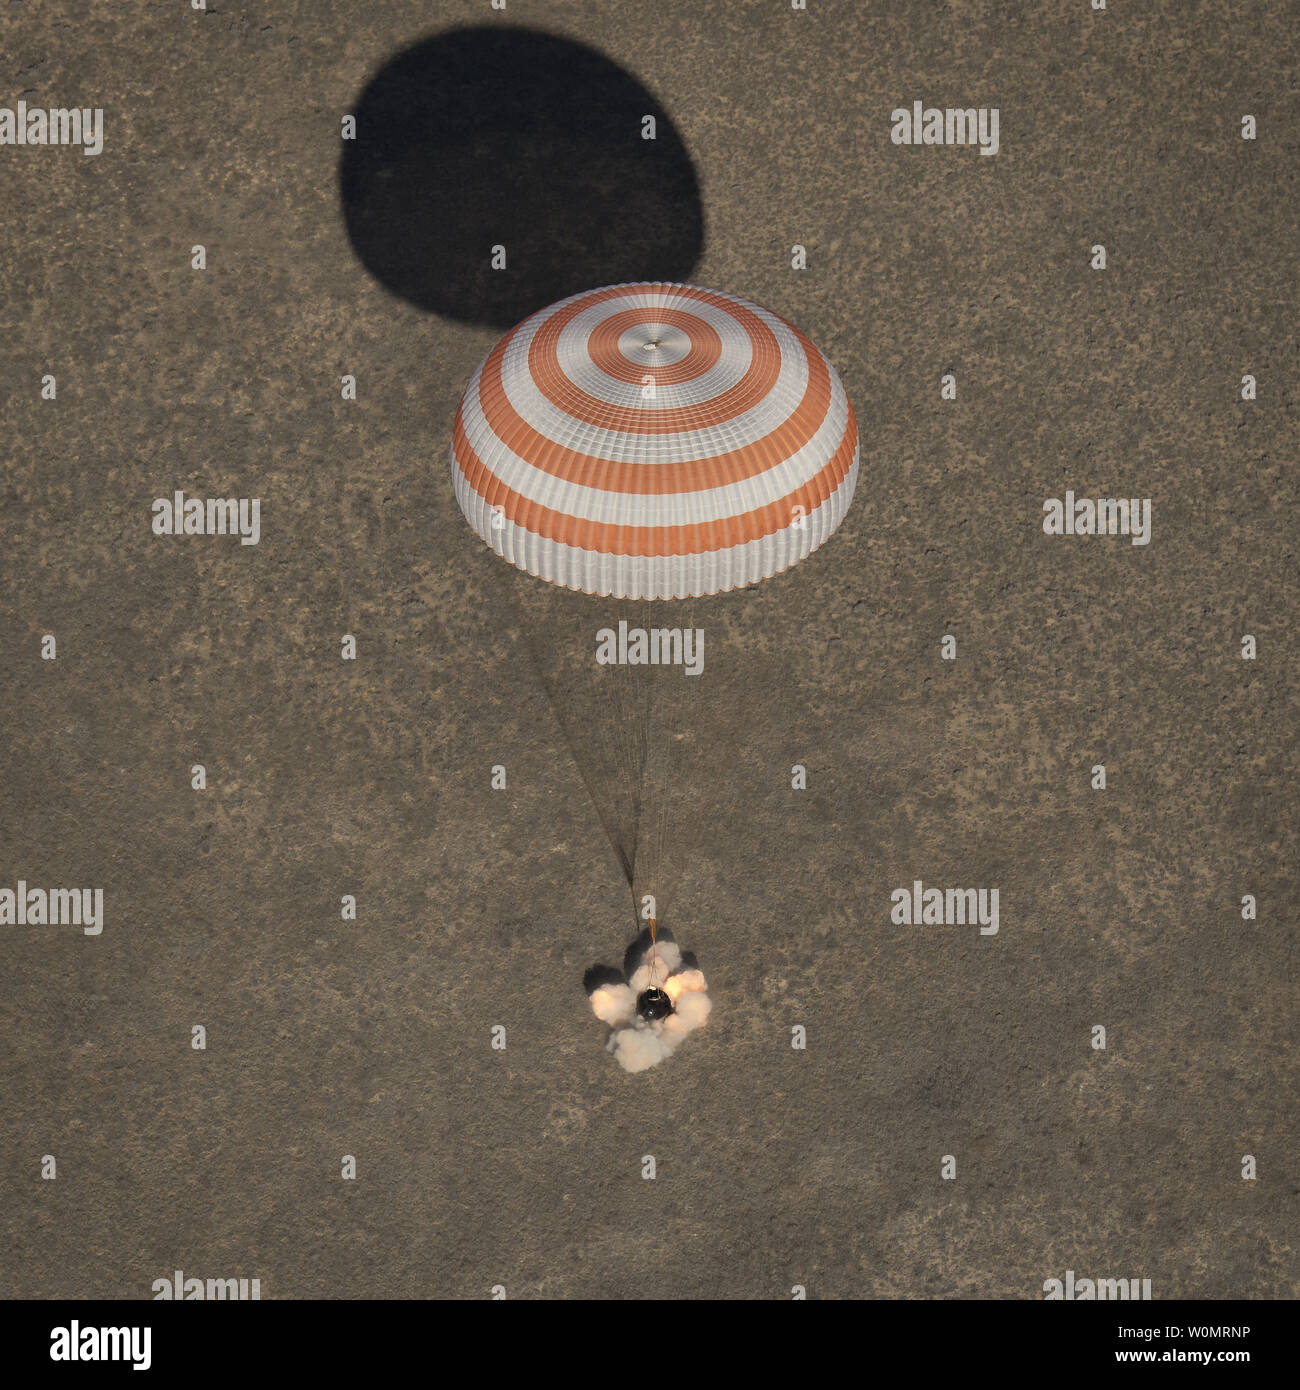 The Soyuz MS-02 spacecraft is seen as it lands with Expedition 50 Commander Shane Kimbrough of NASA and Flight Engineers Sergey Ryzhikov and Andrey Borisenko of Roscosmos near the town of Zhezkazgan, Kazakhstan on Monday, April 10, 2017 (Kazakh time). Kimbrough, Ryzhikov, and Borisenko are returning after 173 days in space where they served as members of the Expedition 49 and 50 crews onboard the International Space Station.        NASA Photo by Bill Ingalls/UPI Stock Photo